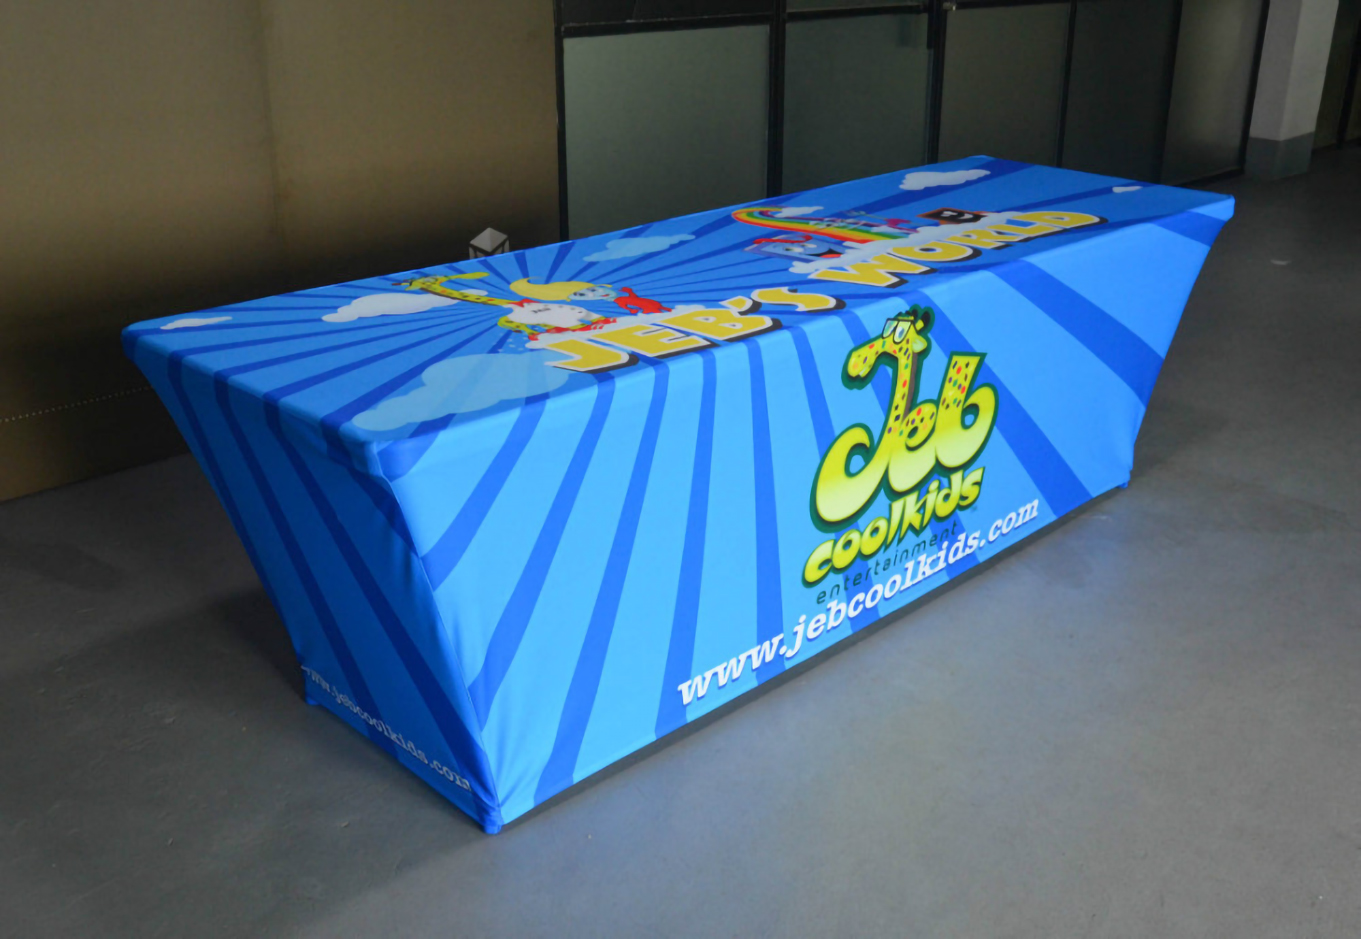 Custom Table Covers From Barrierjackets.com